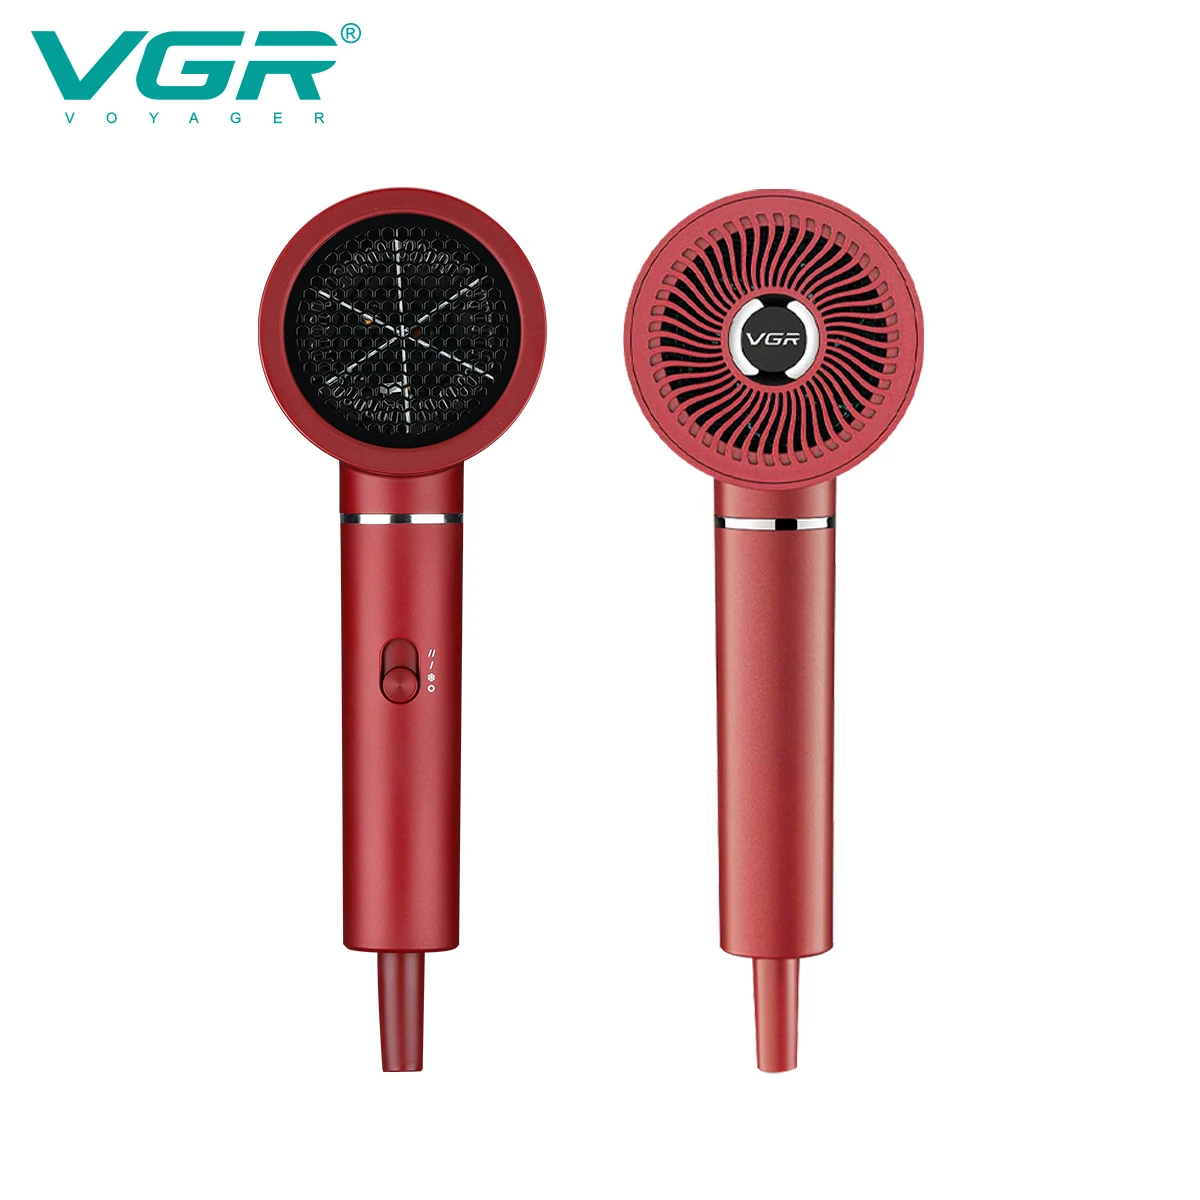 VGR Hair Dryer Professional Hair Blow Dryer Anion Electric Mini Hair Dryer for Home Appliance Personal Care Styling Tools V-431 images - 6